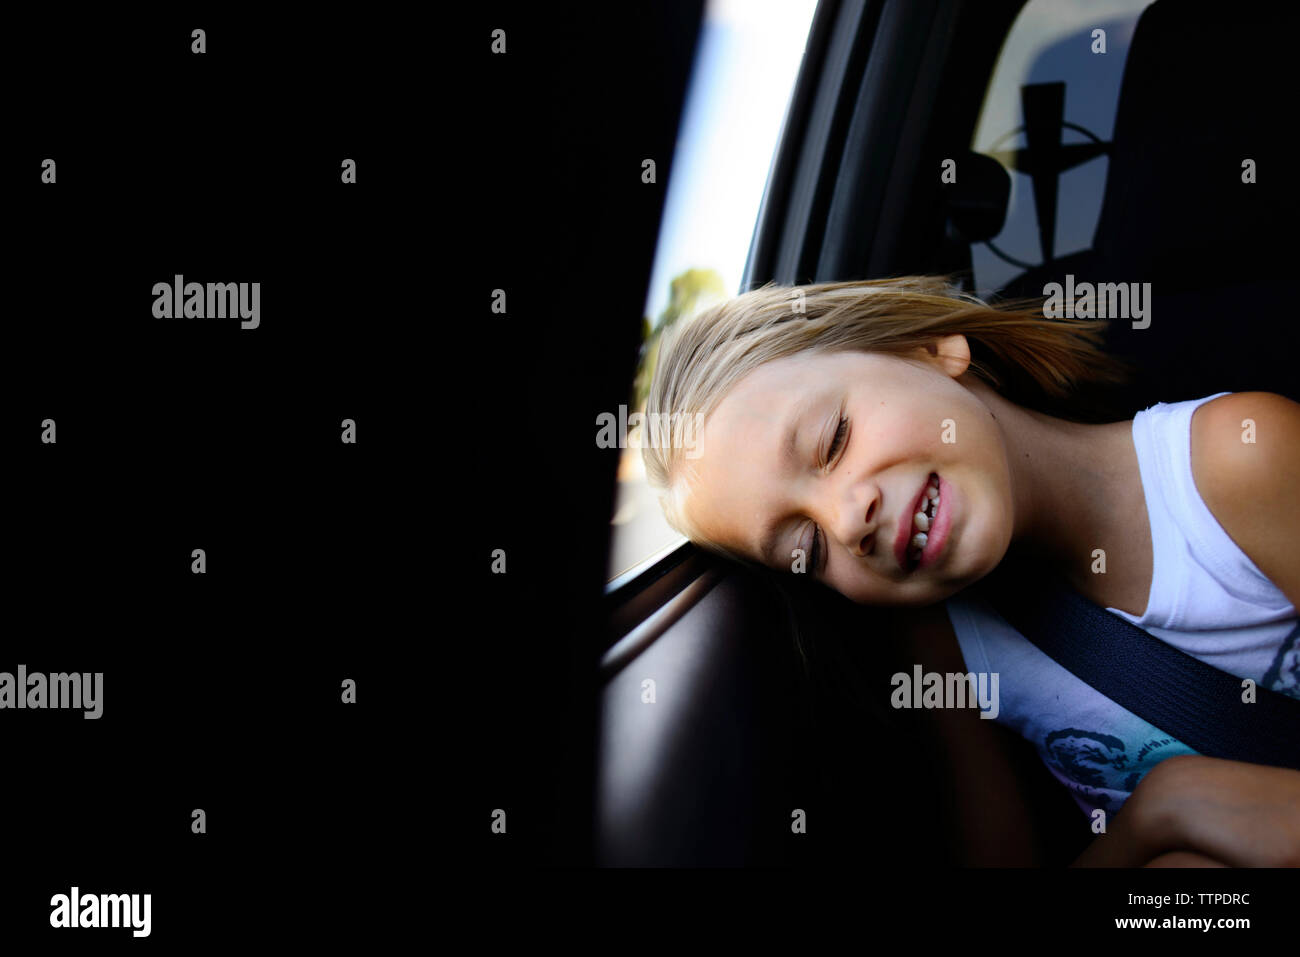 Girl napping while sitting in car Stock Photo